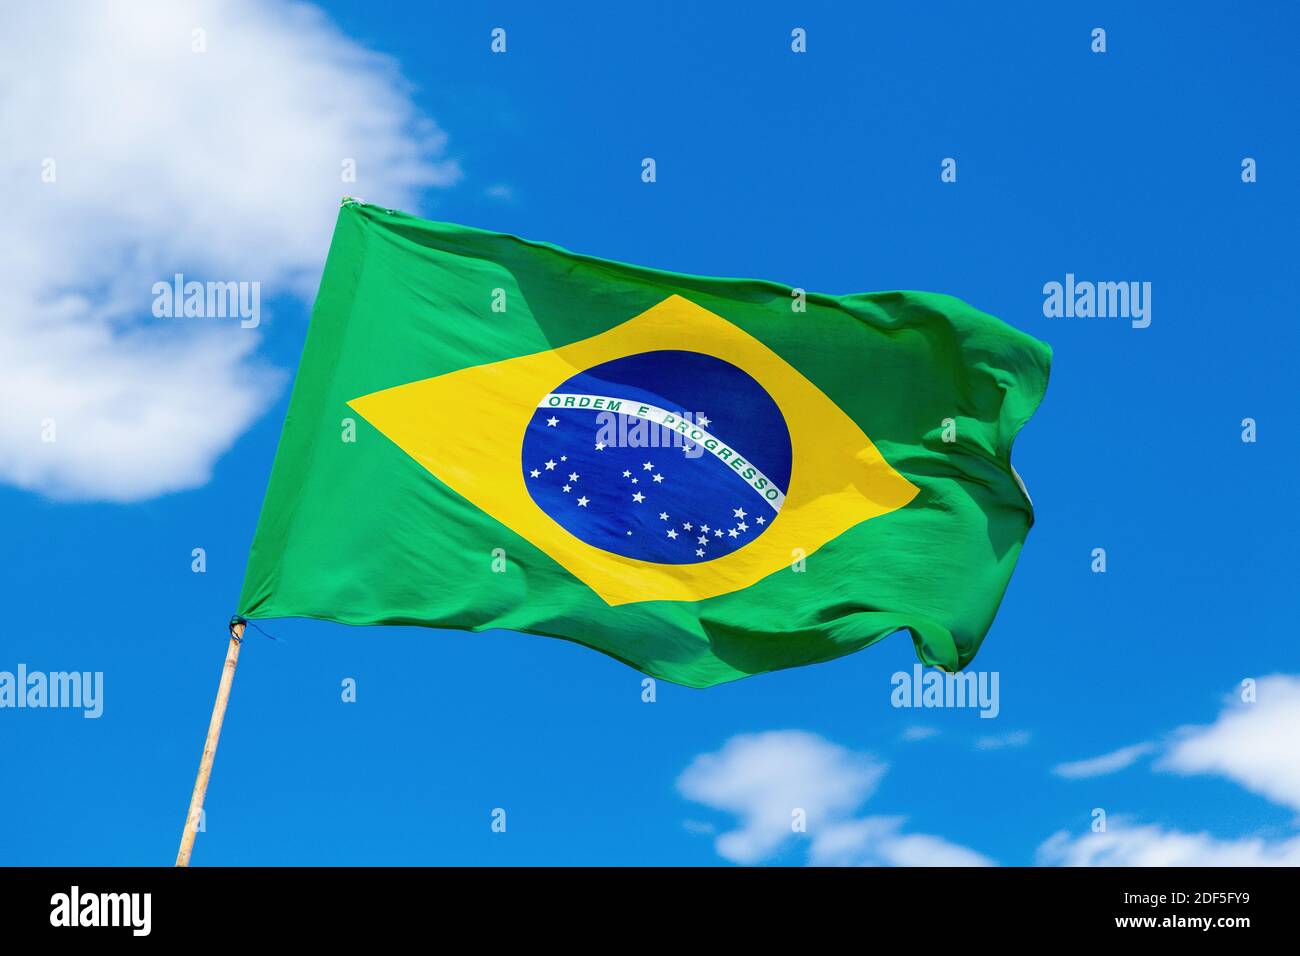 Brazilian flag waving on blue sky with some clouds. Brazil country colors. Stock Photo